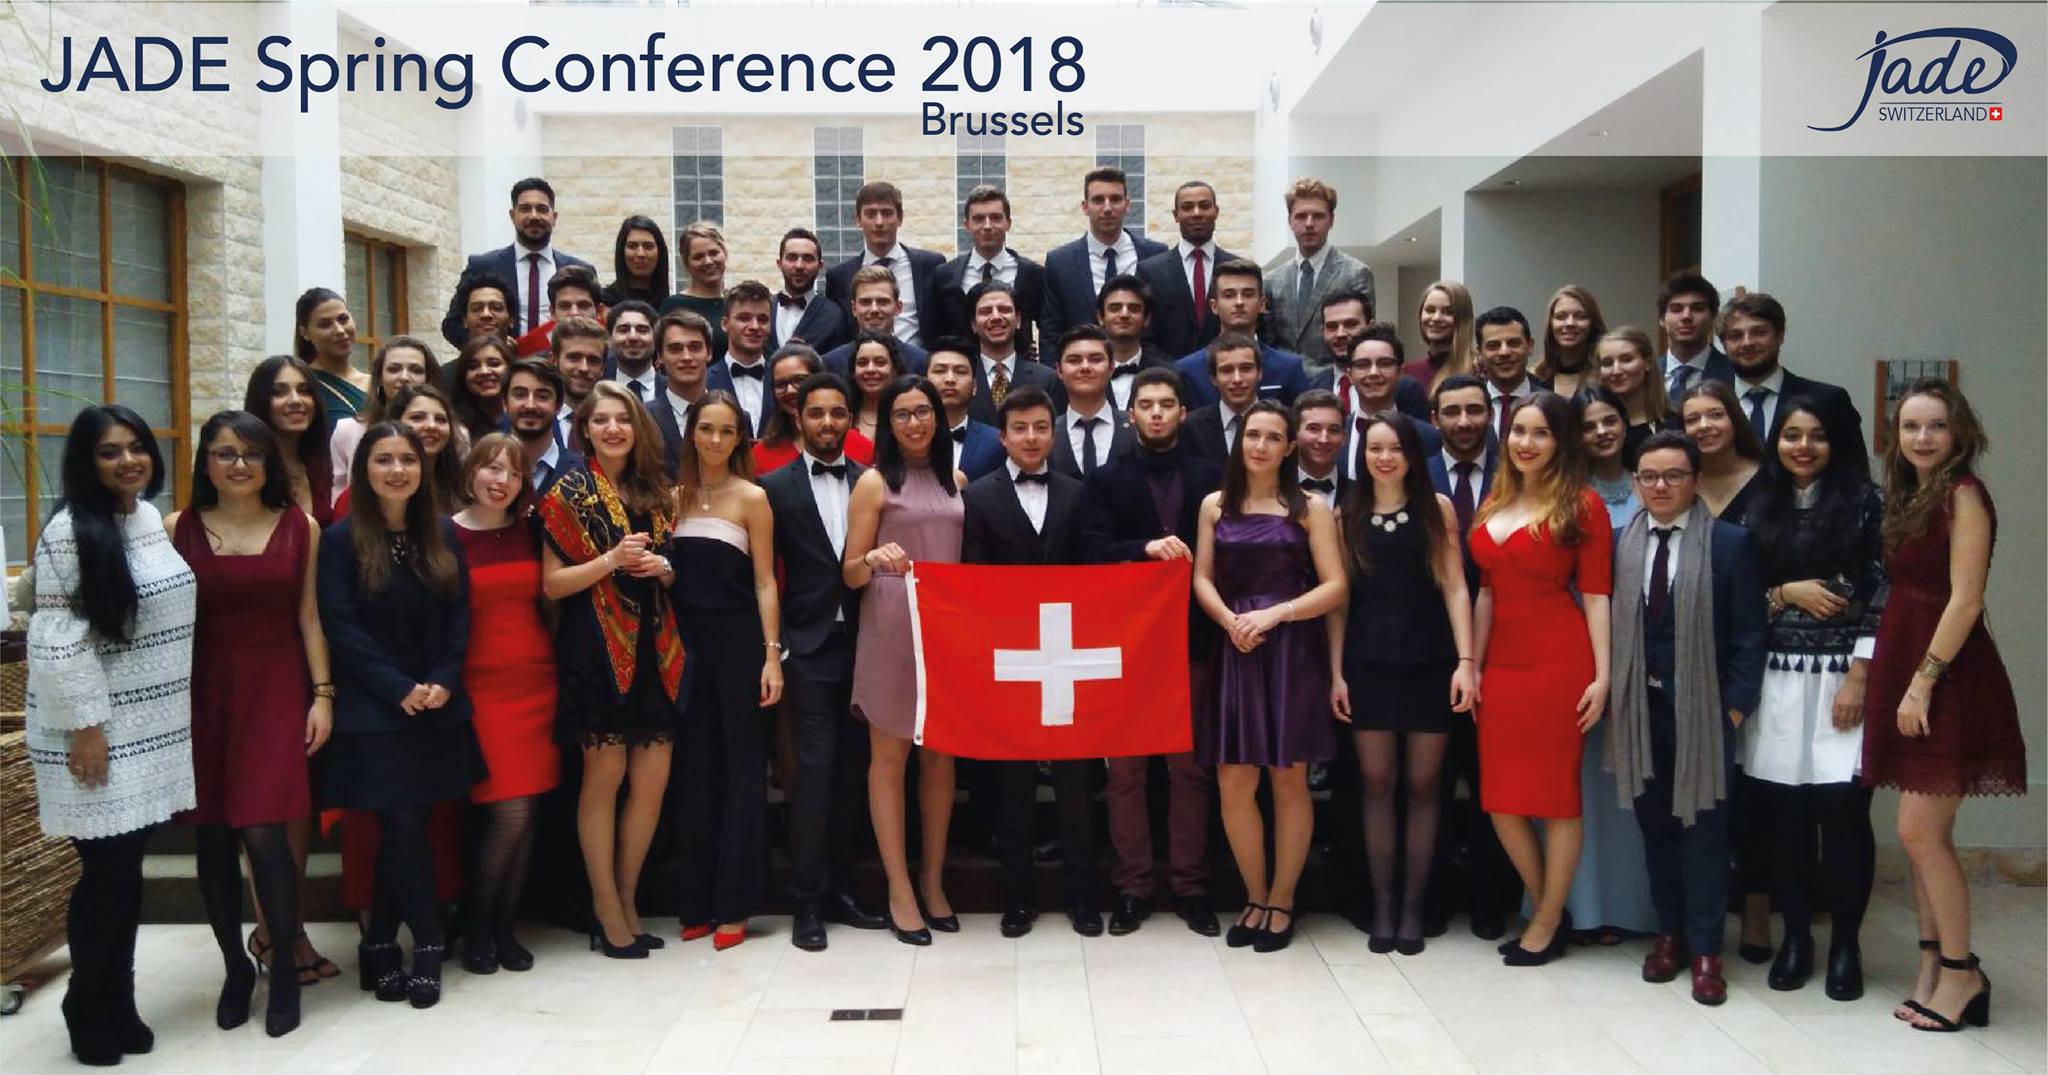 Swiss performance in the JADE Spring Conference 2018